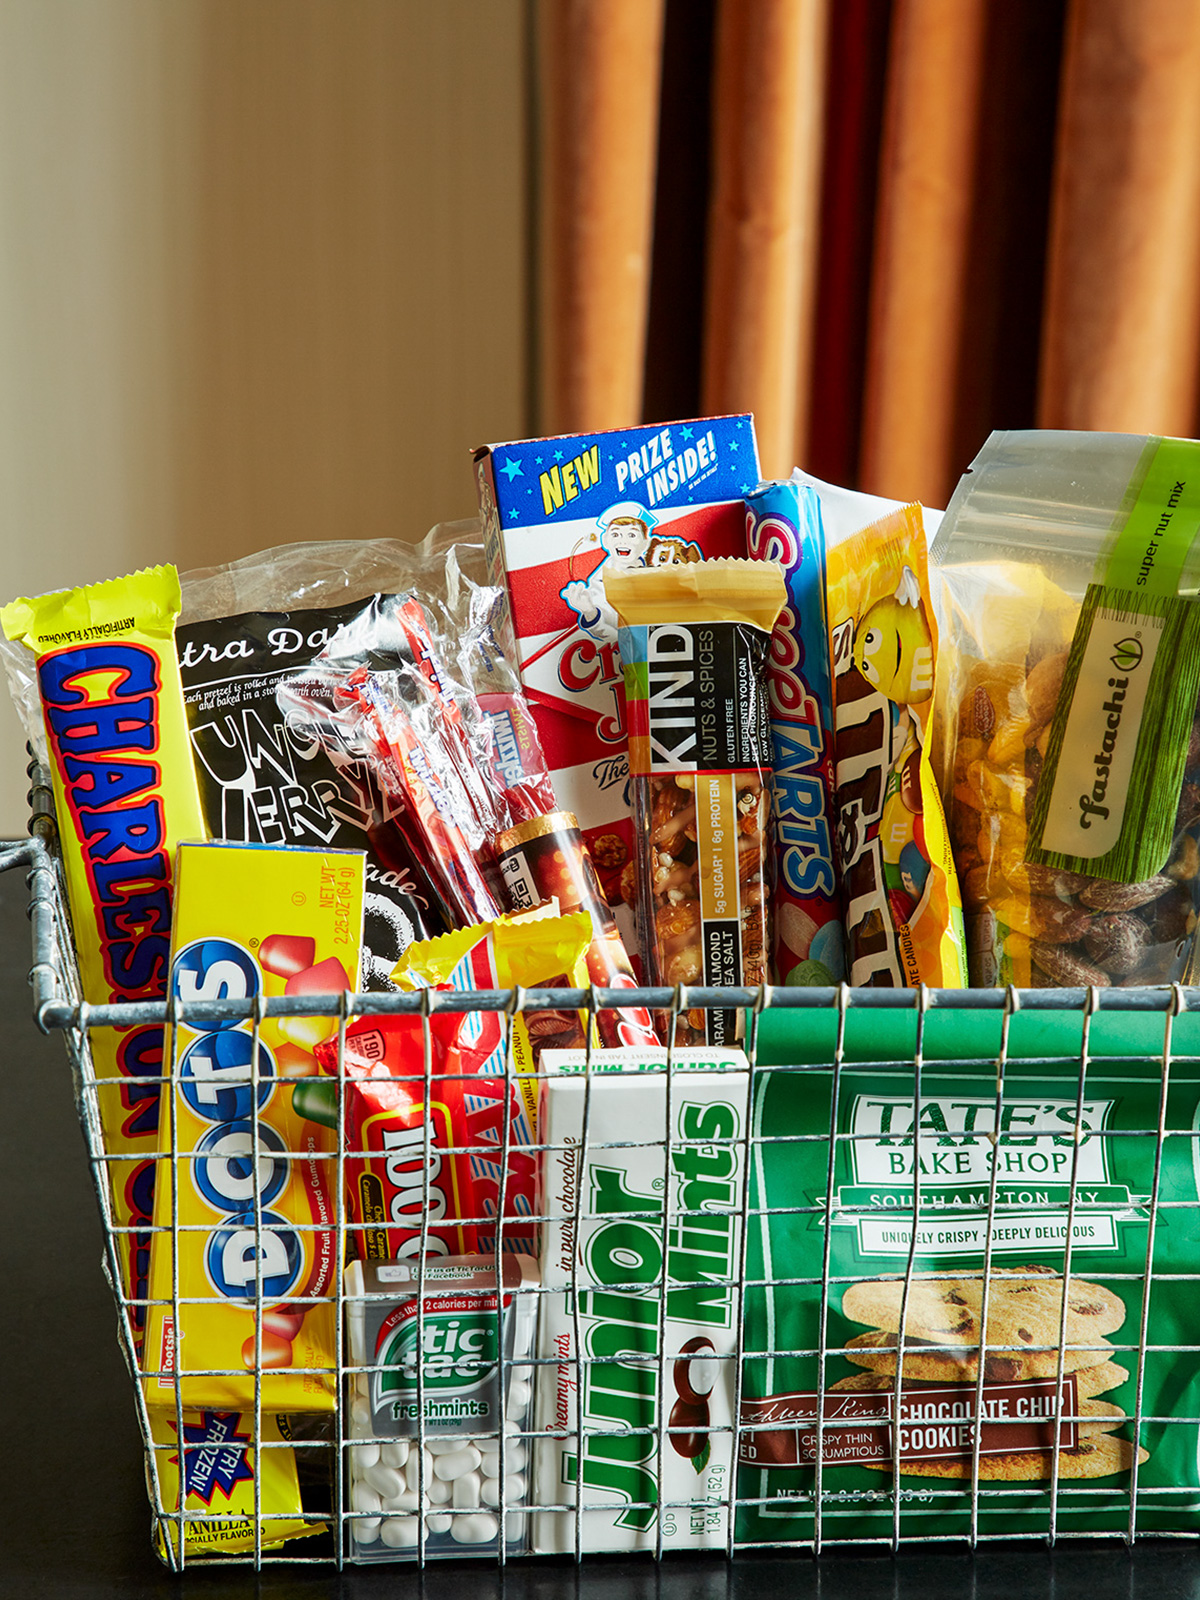 View of the complimentary snack basket